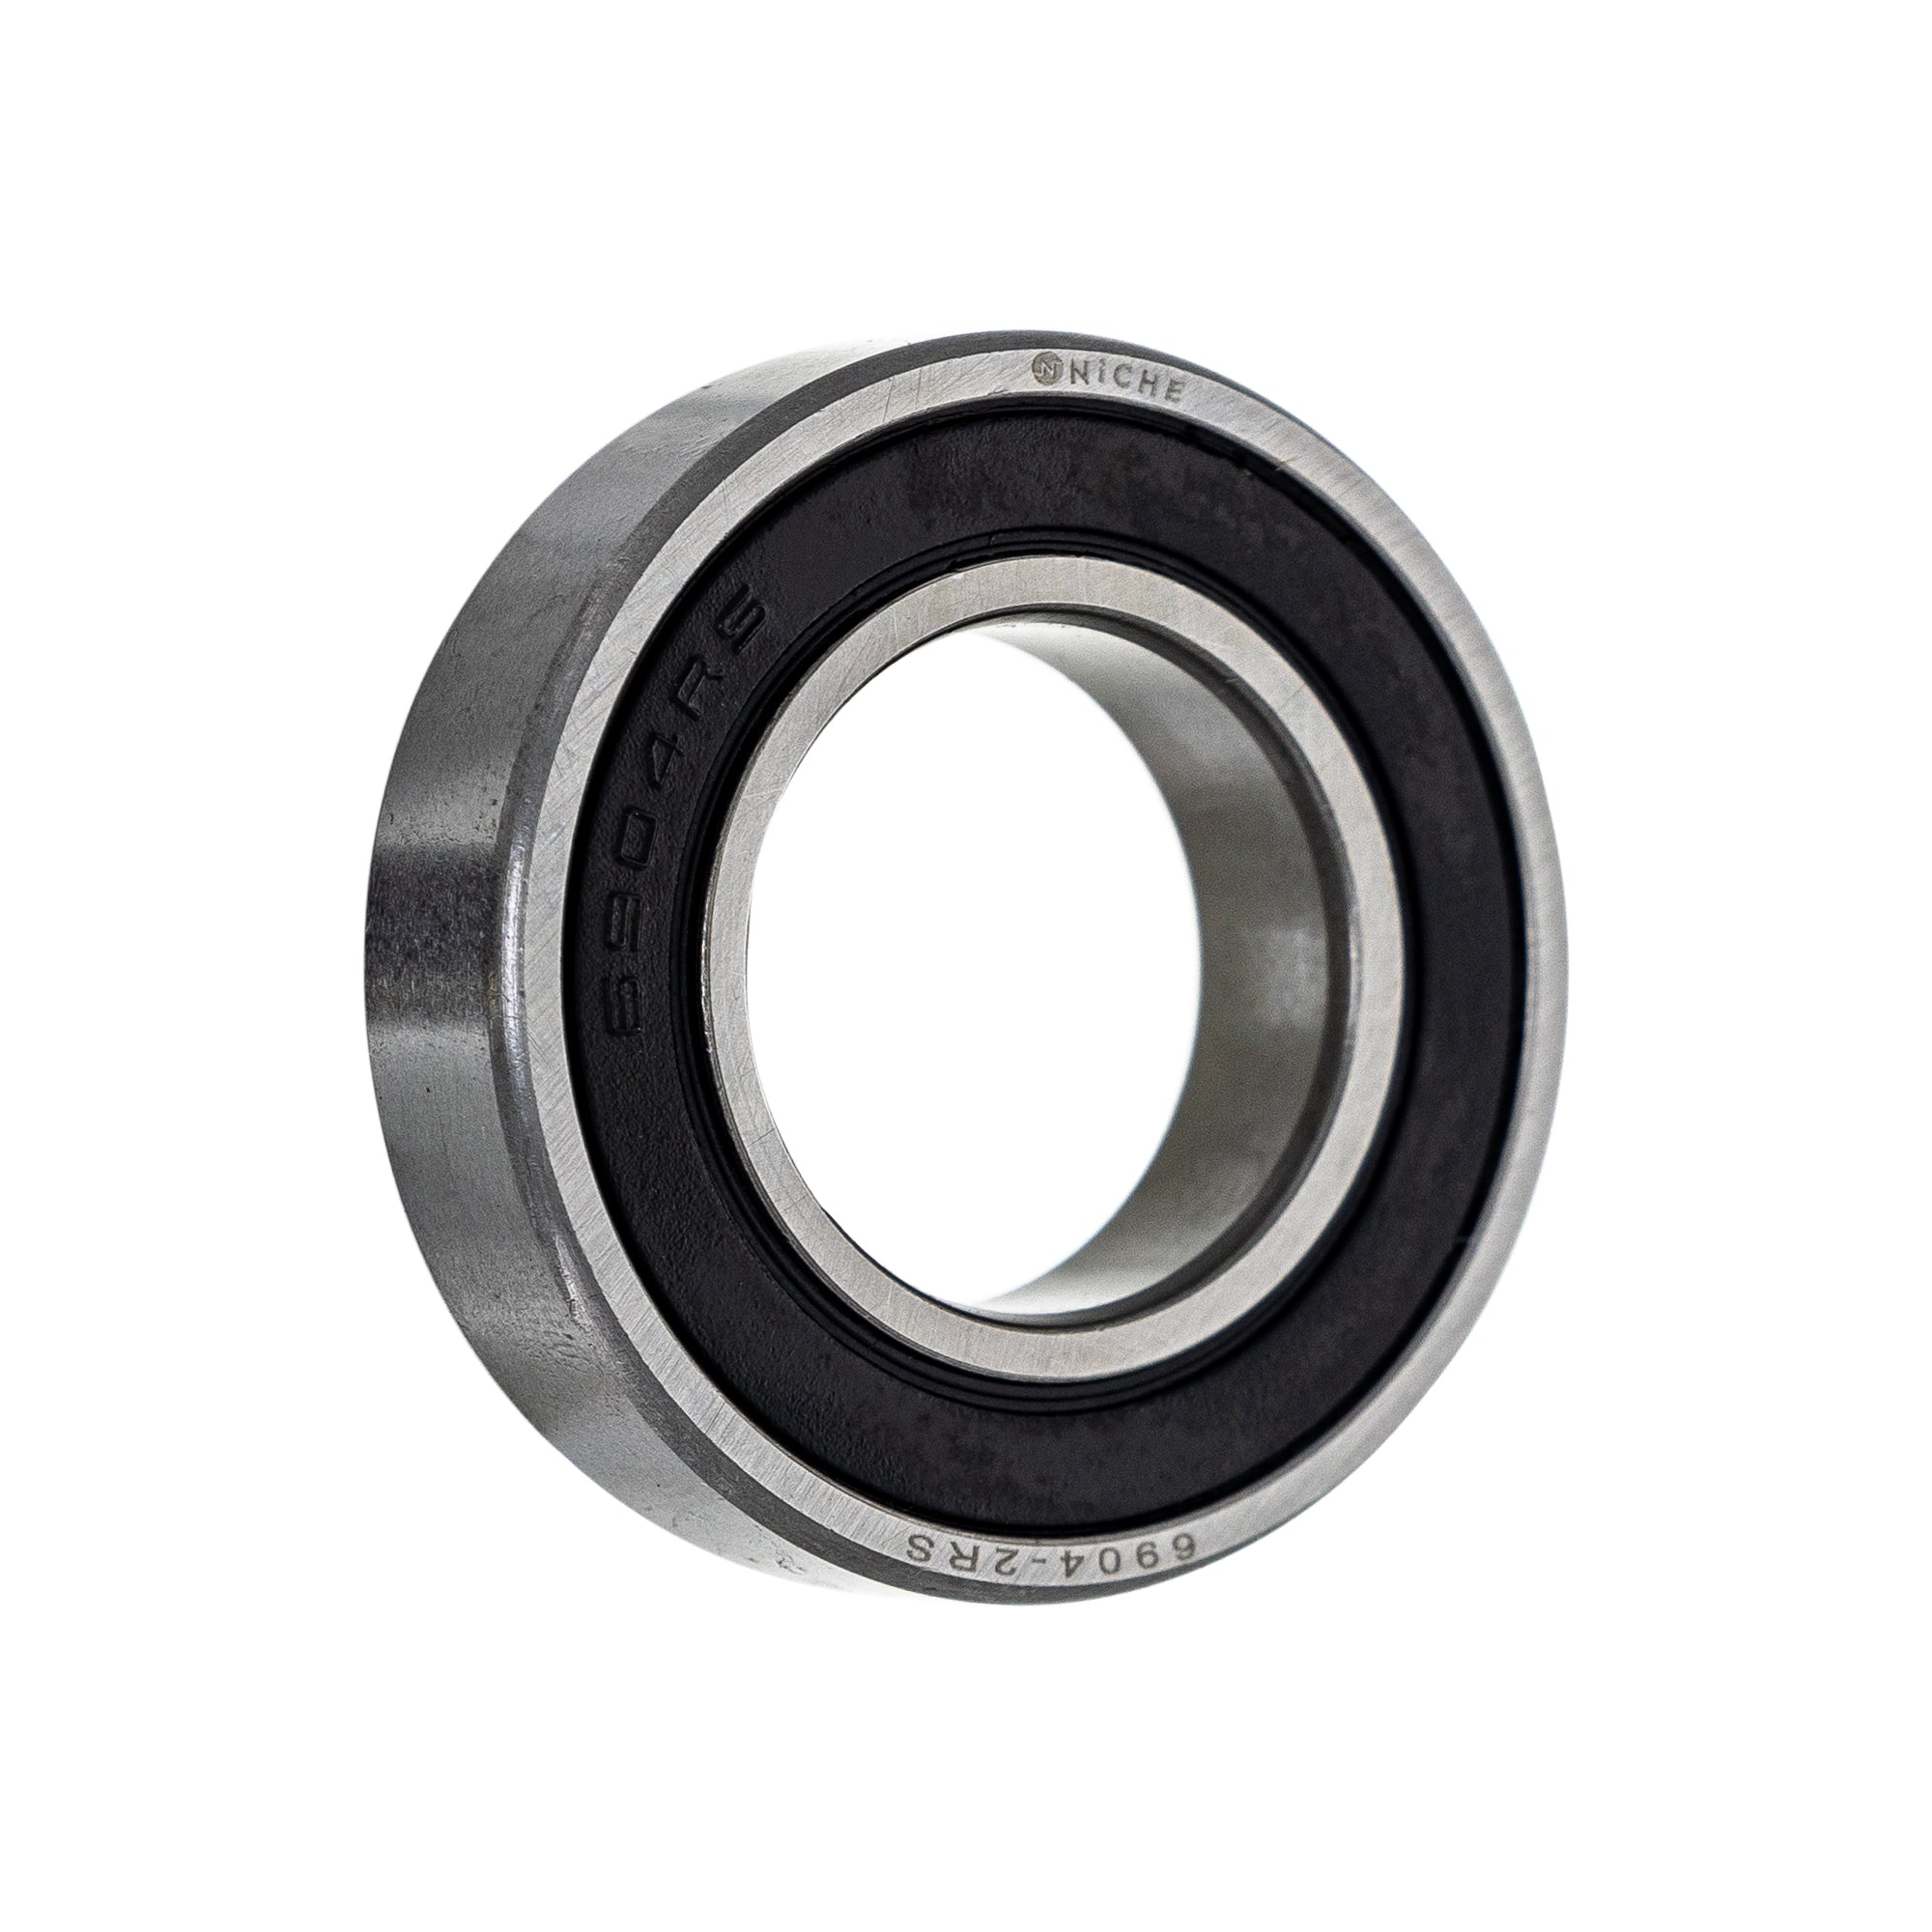 NICHE MK1009218 Bearing & Seal Kit for zOTHER YZ450F YZ426F YZ250F